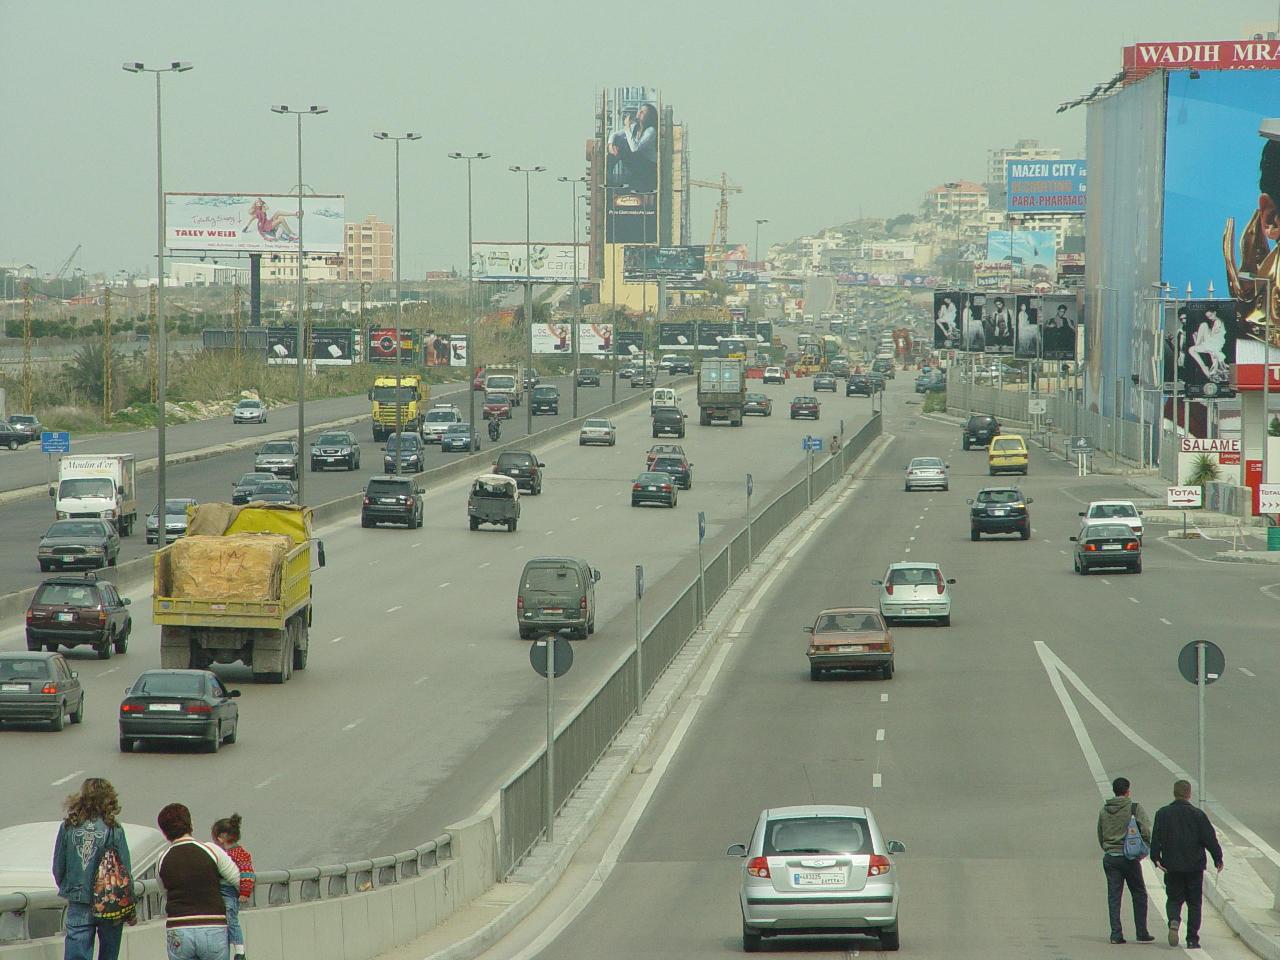 a busy highway with many cars and pedestrians